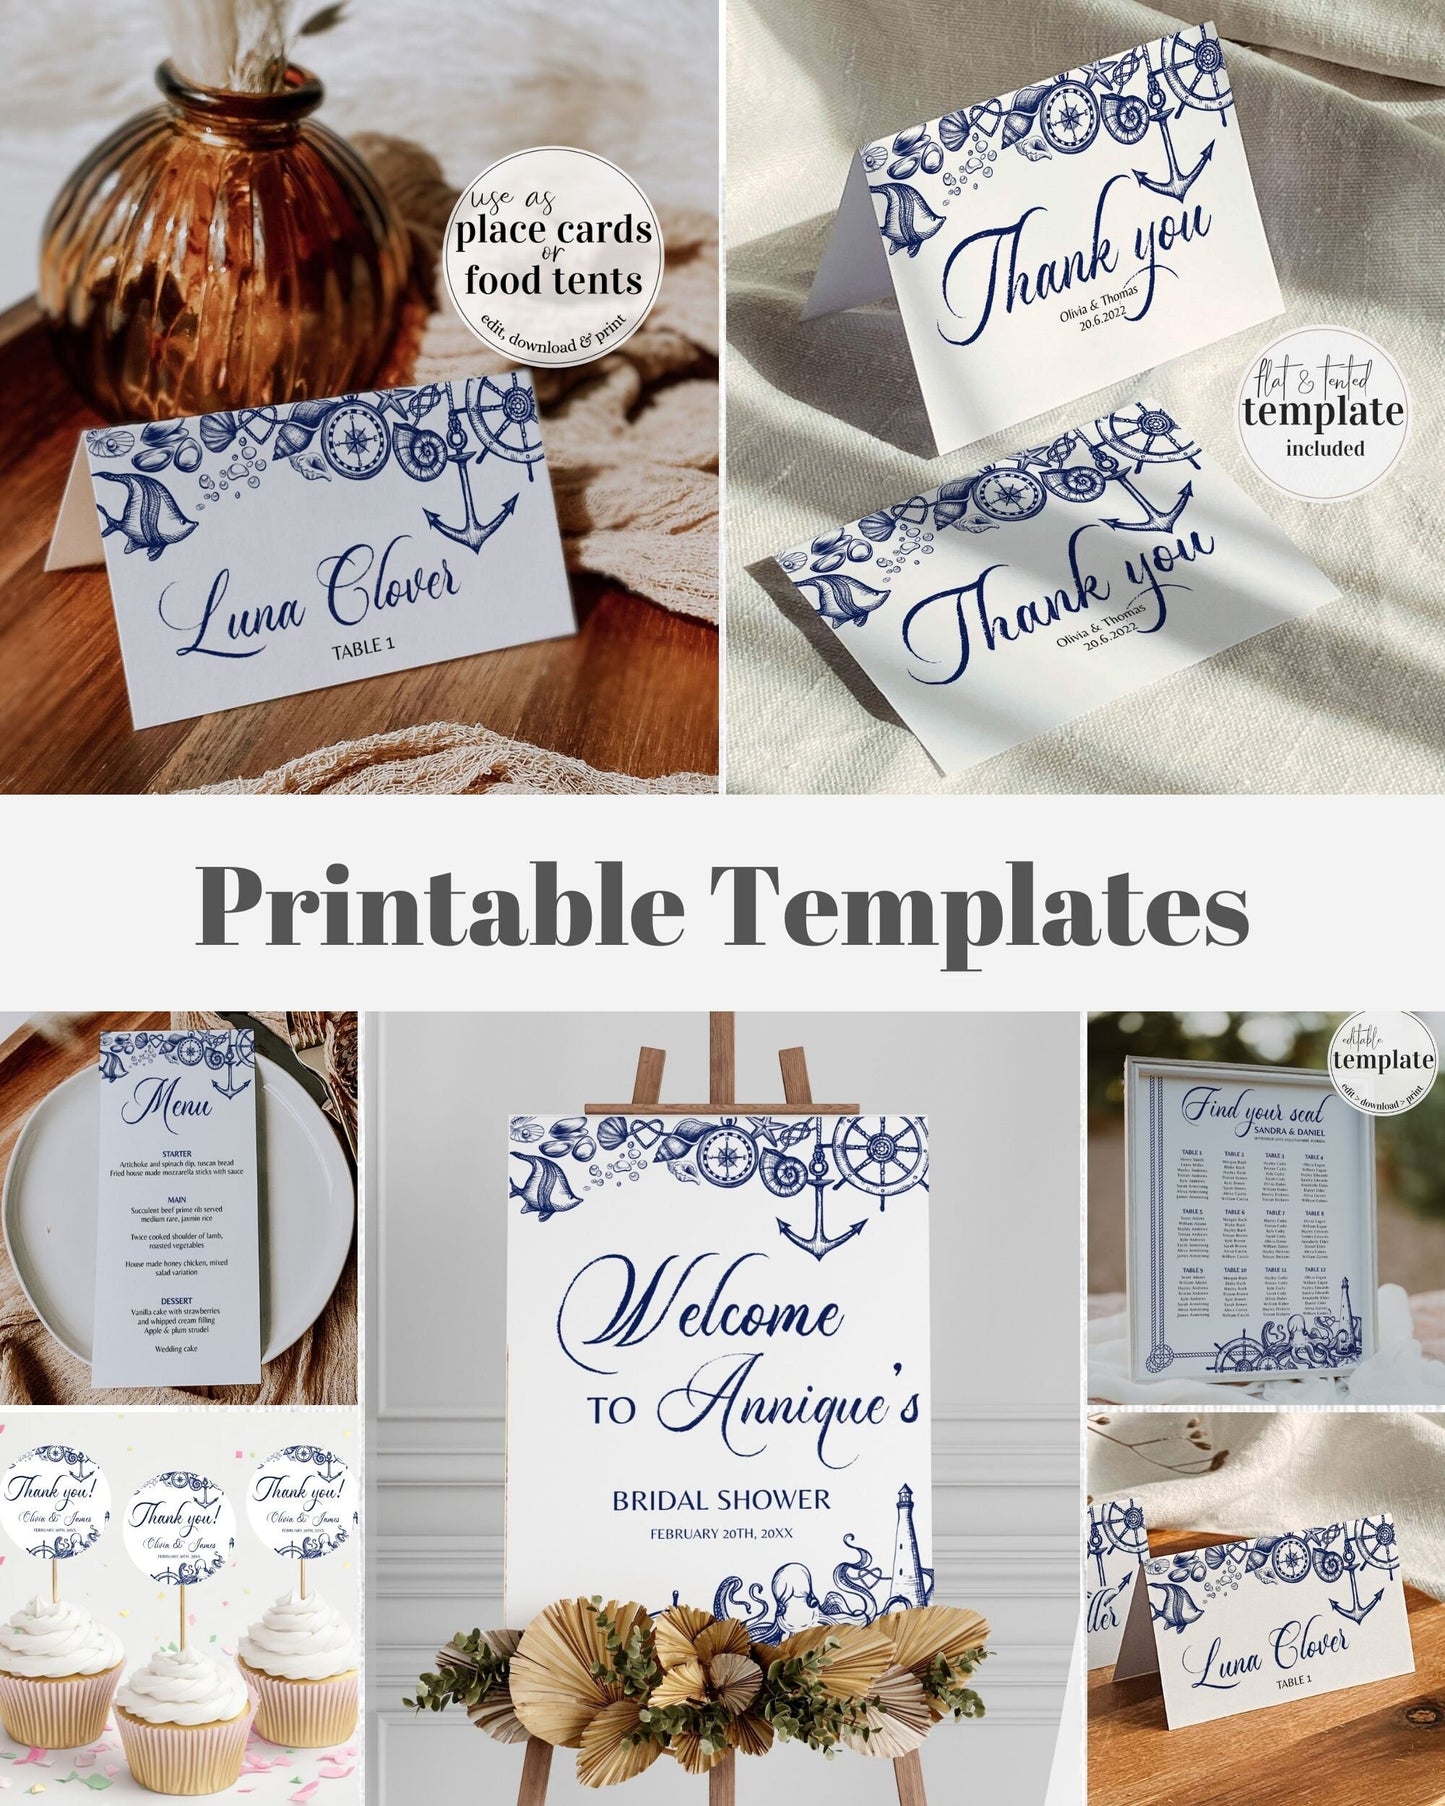 Nautical Decor Bundle for Beach or Destination Wedding with Welcome Sign, Seating Chart, Table Numbers, Place Card, Menu Cards and more